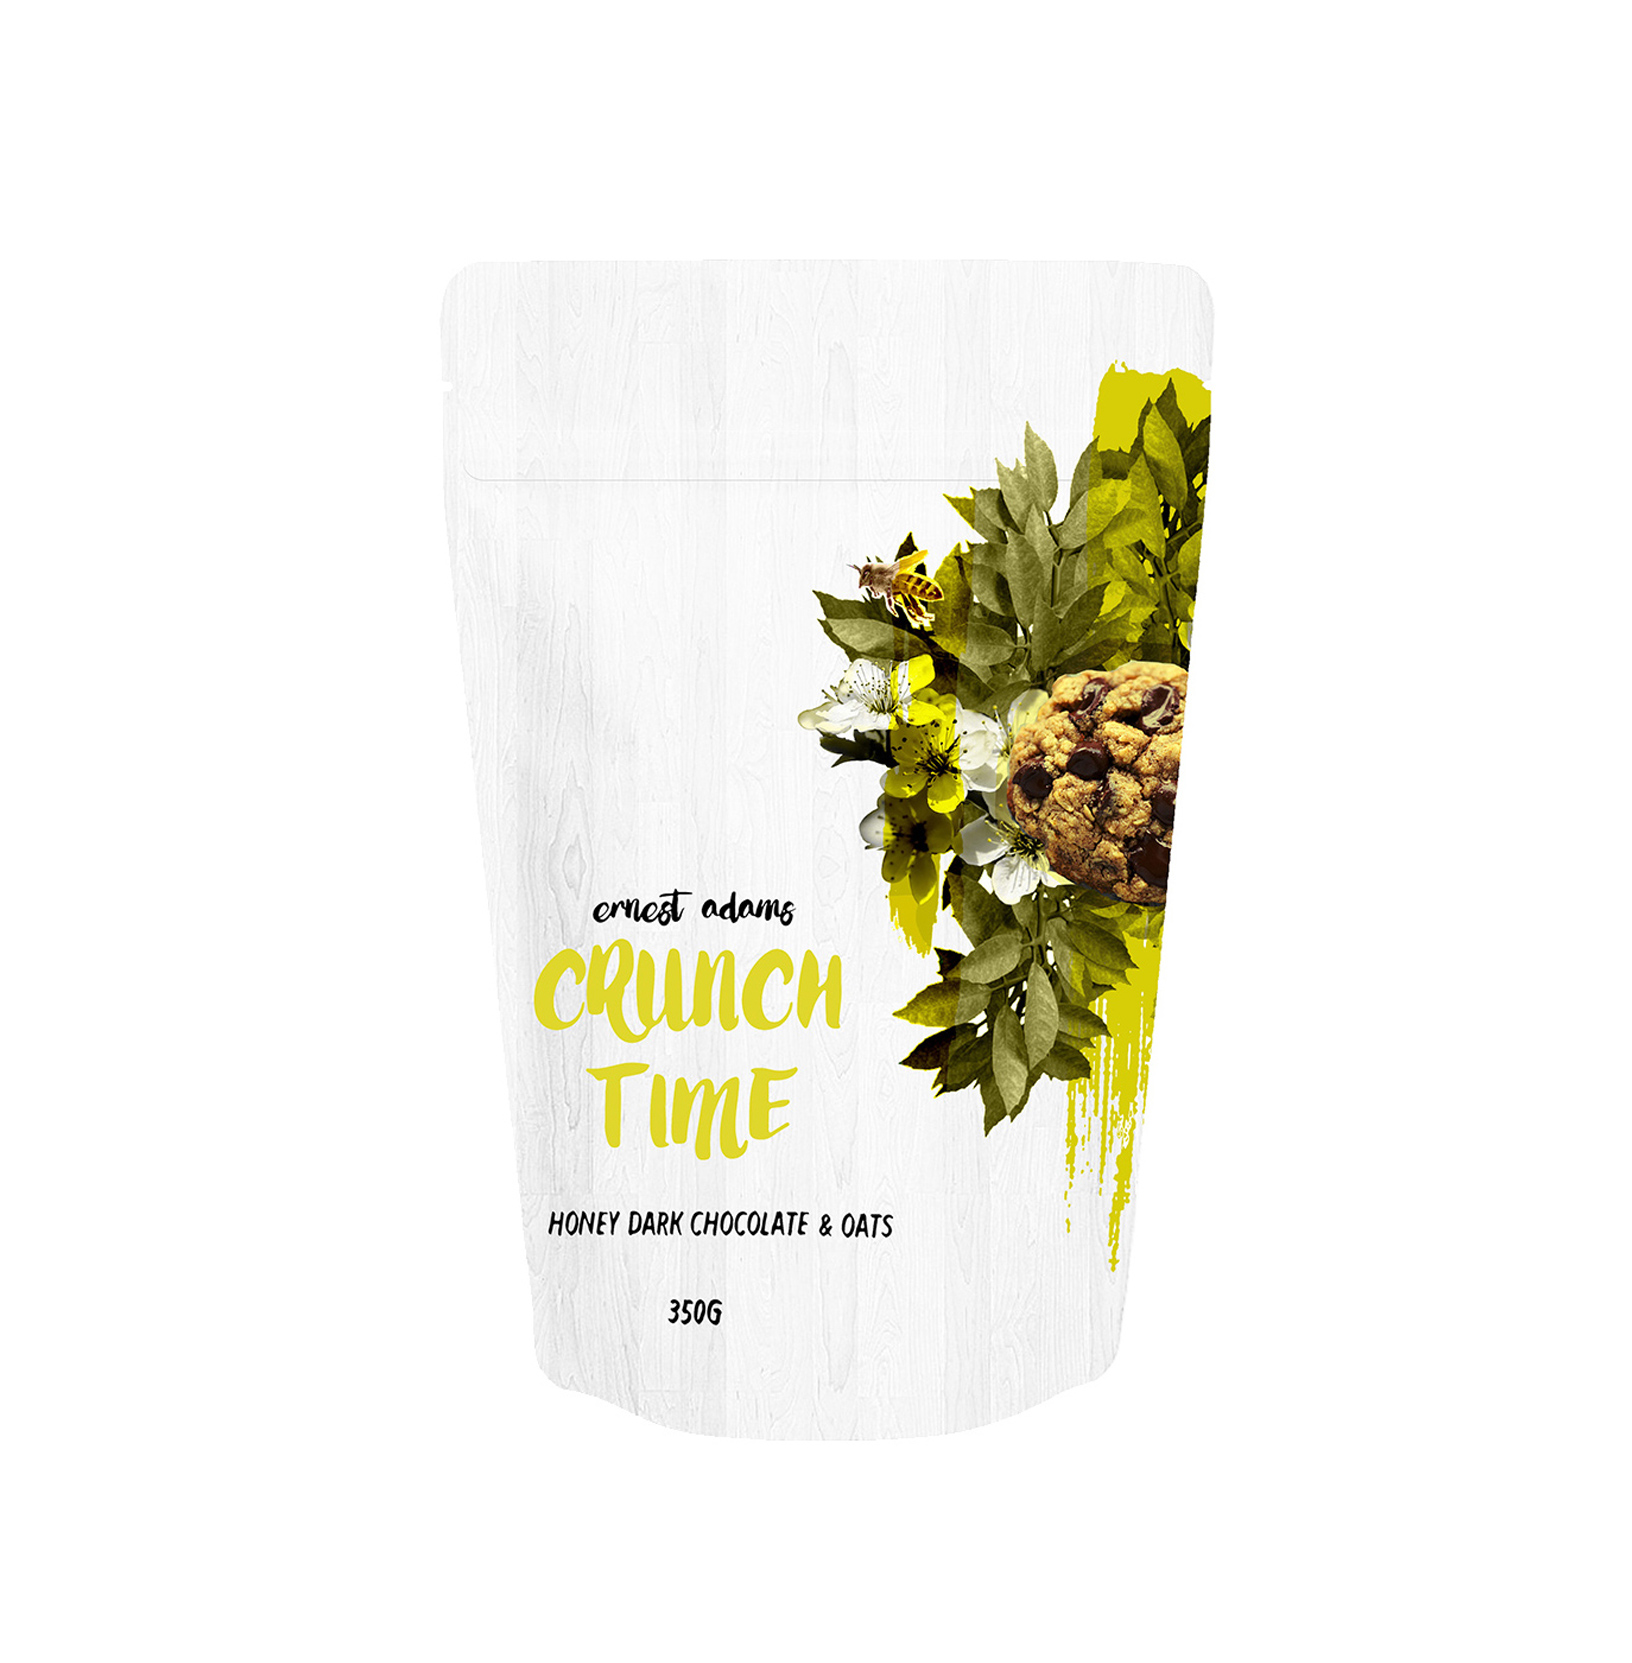 crunch time honey oats and dark choclate packaging